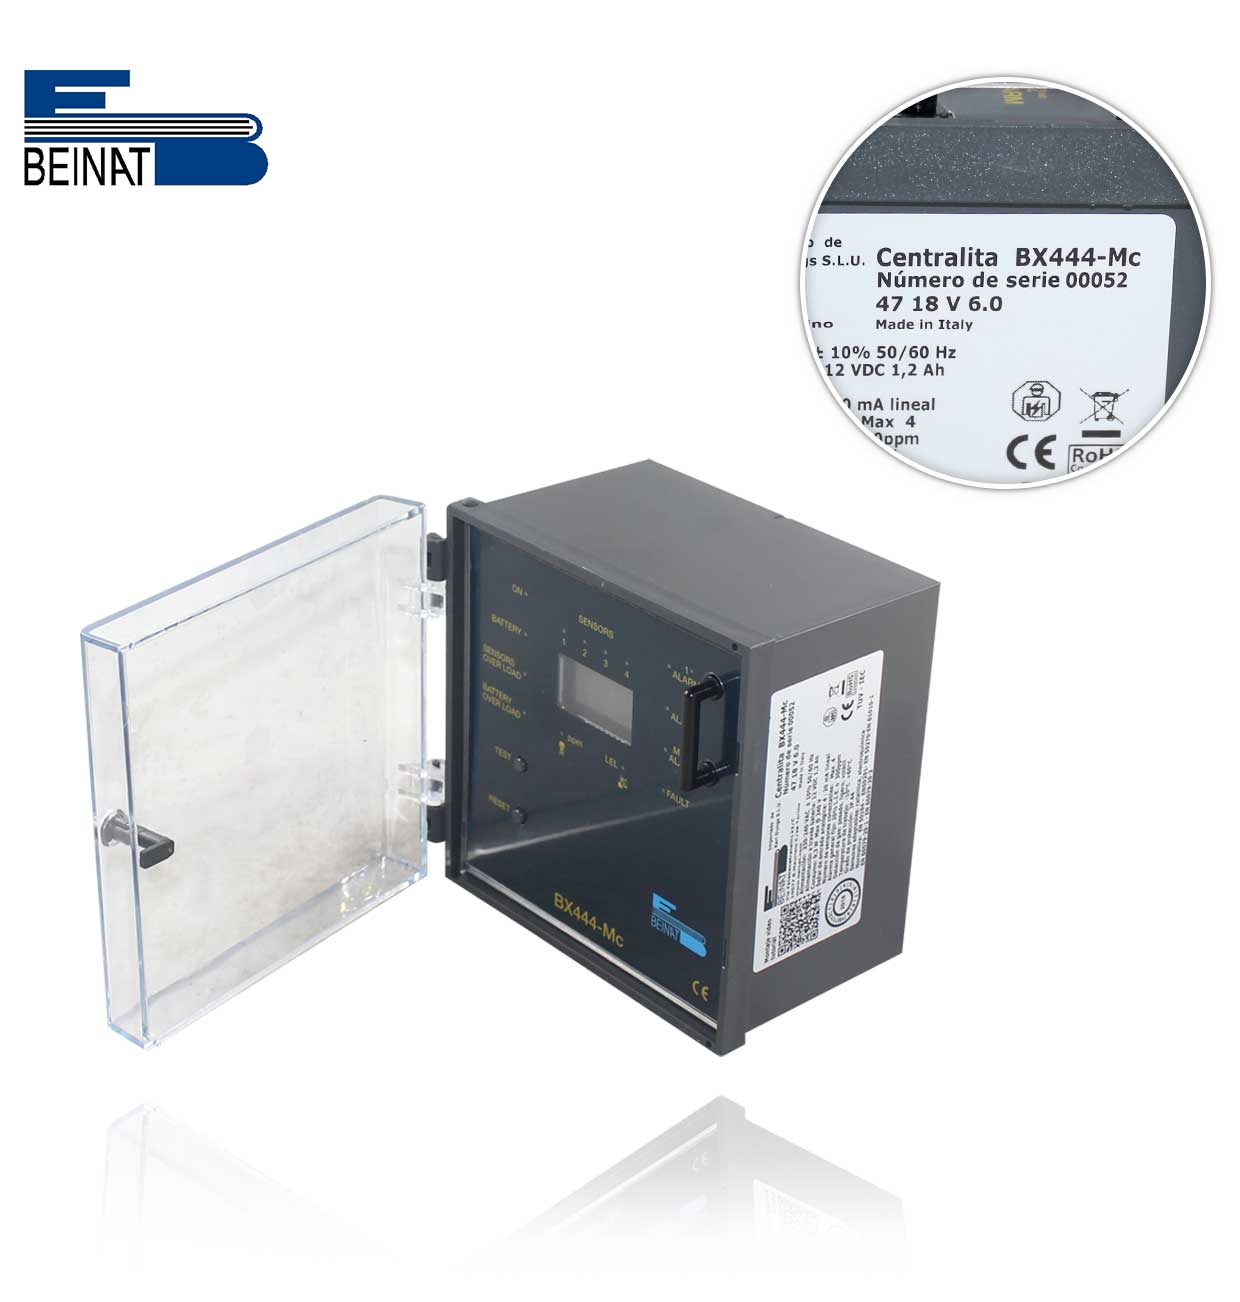 BEINAT BX 444 Mc  LEAKAGE DETECTION CONTROL BOX (WALL-MOUNTED)